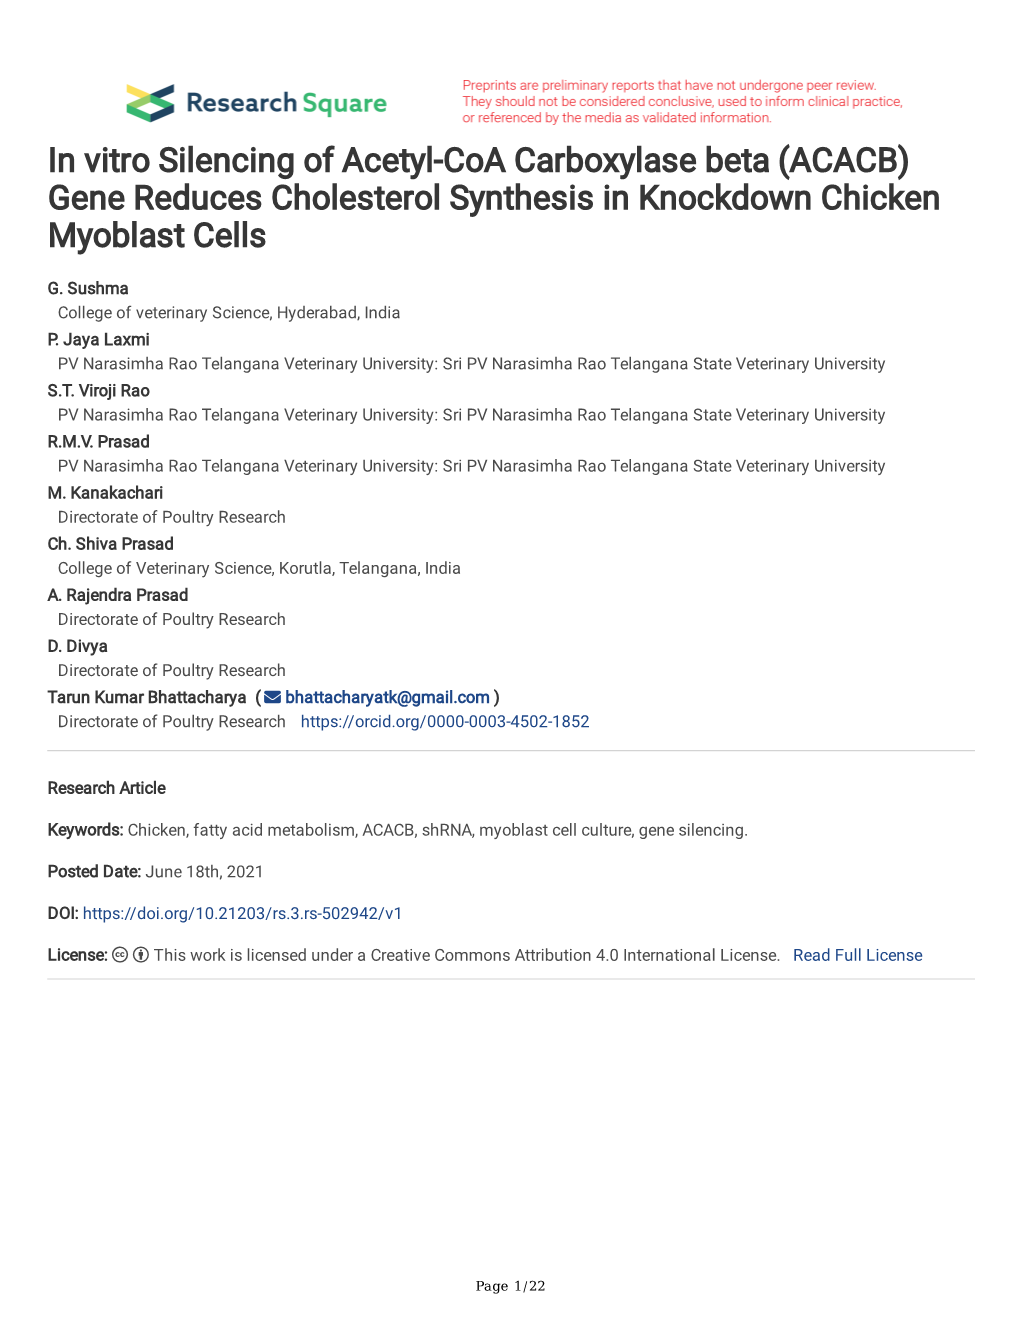 In Vitro Silencing of Acetyl-Coa Carboxylase Beta (ACACB) Gene Reduces Cholesterol Synthesis in Knockdown Chicken Myoblast Cells